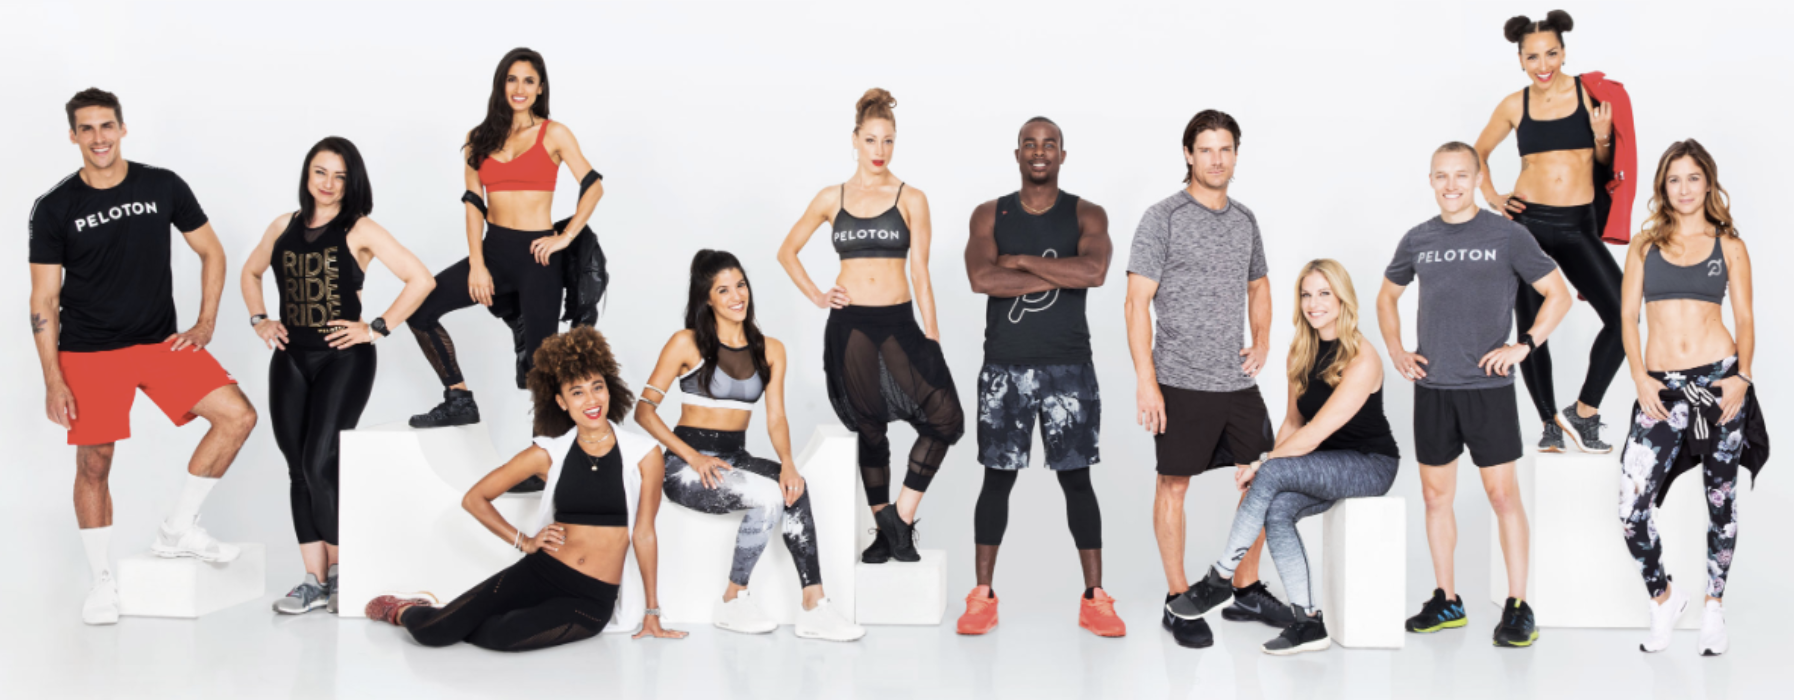 The Proof Is In The Pudding How These Peloton Instructors Are Leading The Way For Fitness Centered Influencer Marketing Captiv8